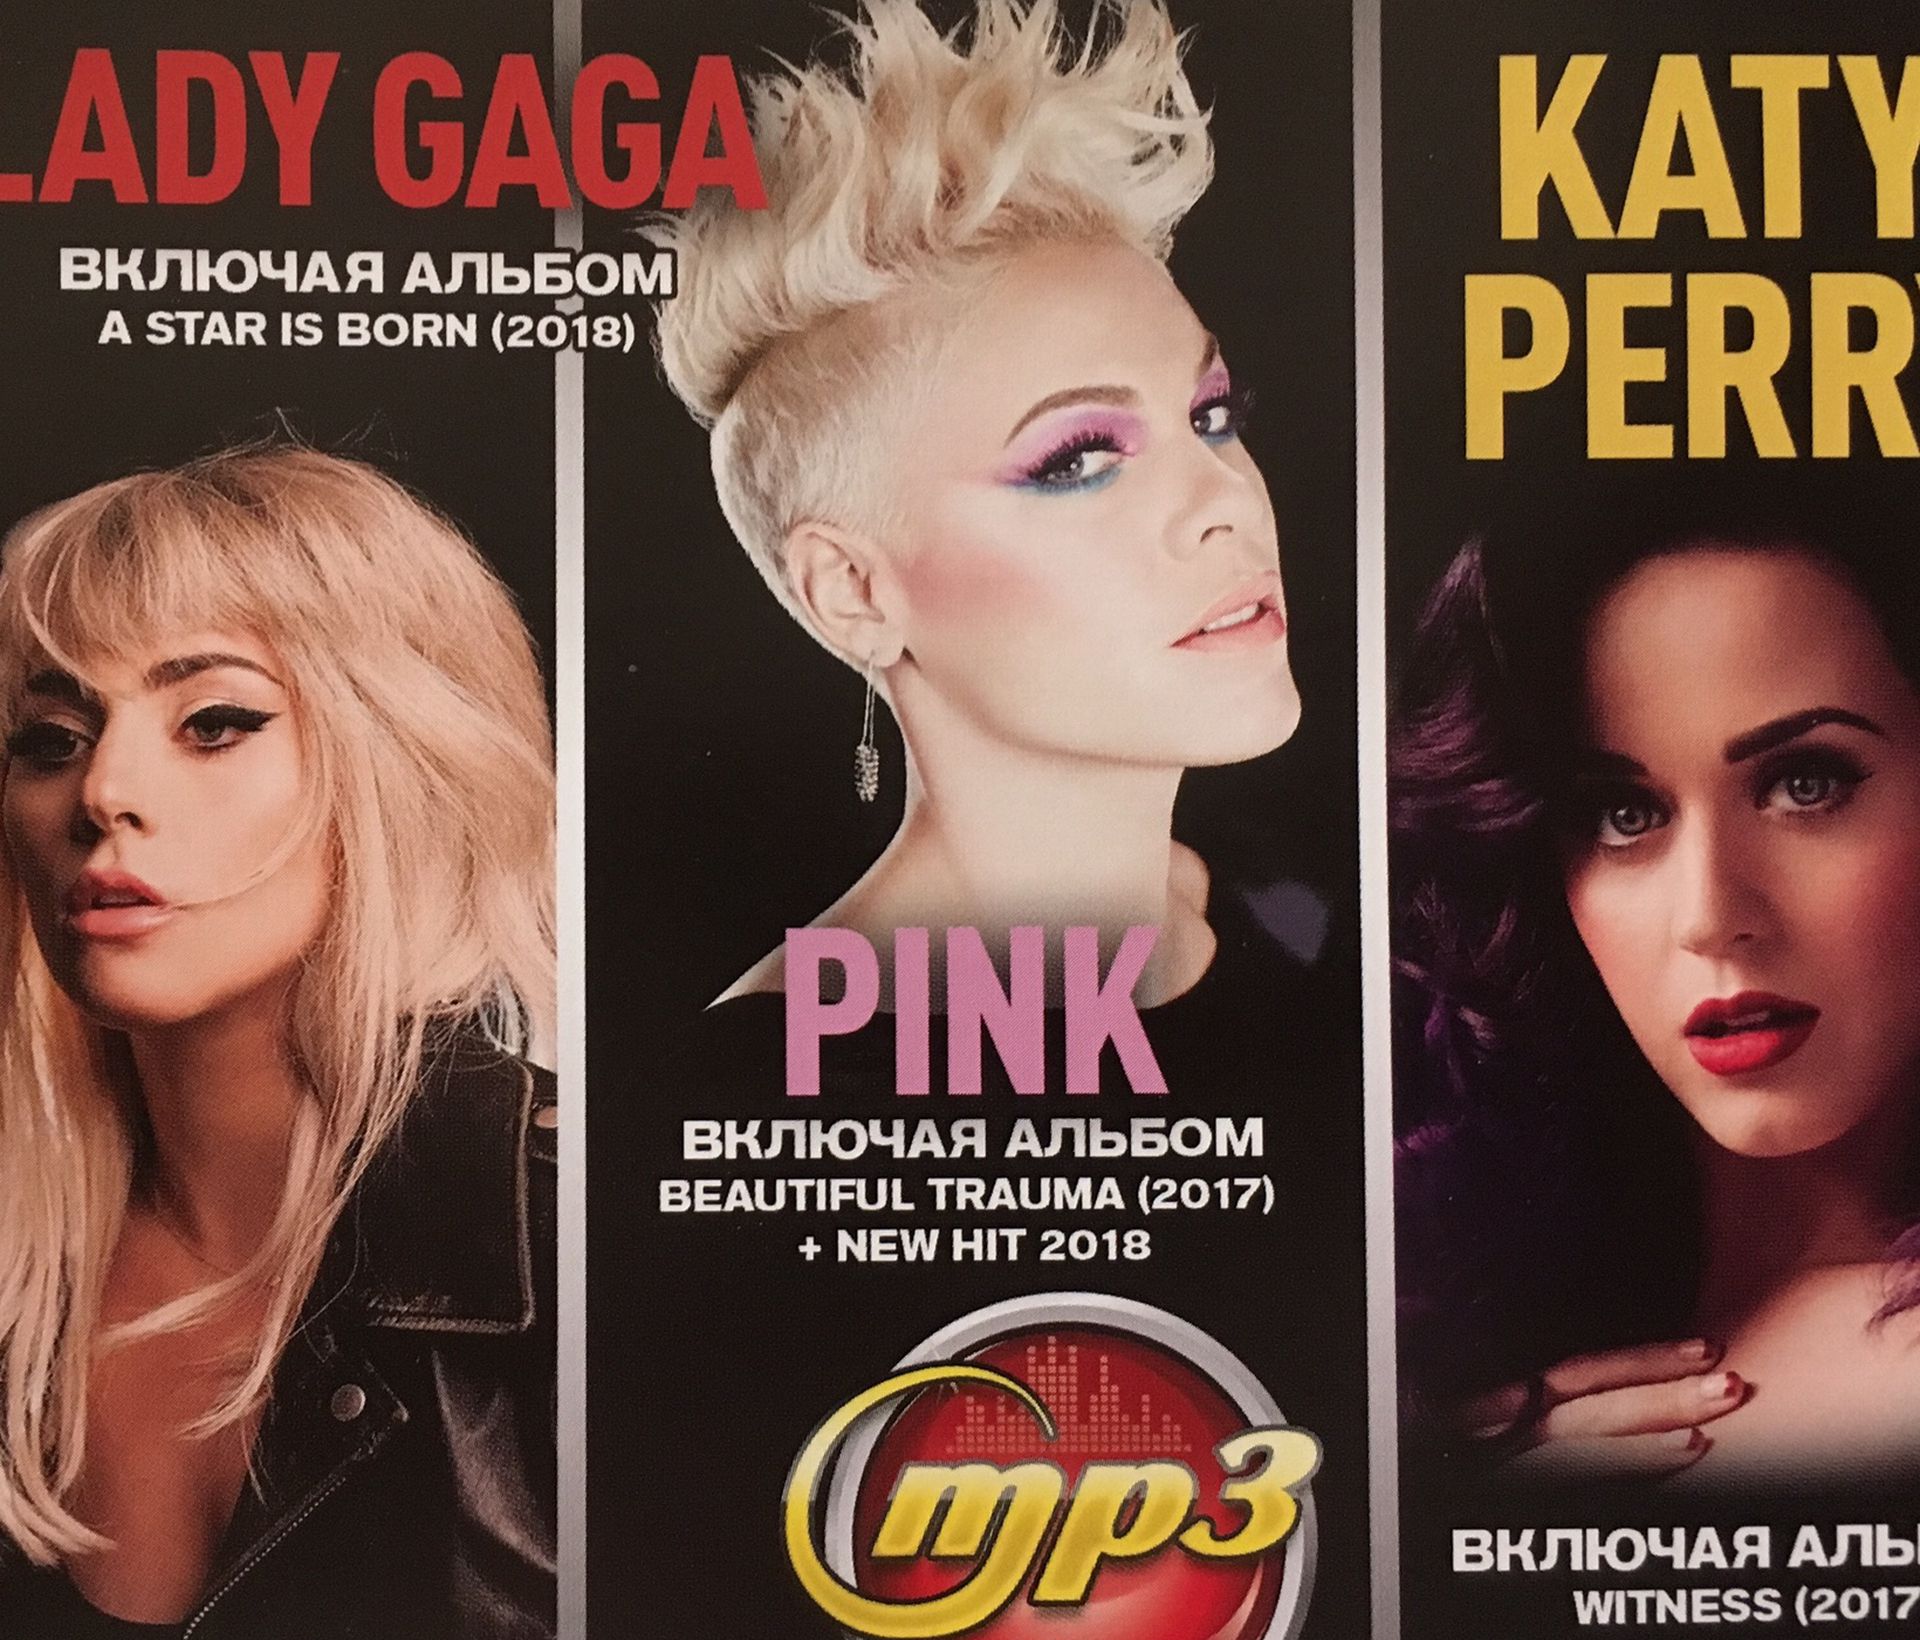 Lady Gaga & Pink & Katty Perry - Collection 15 MP3 Albums 2008-2018